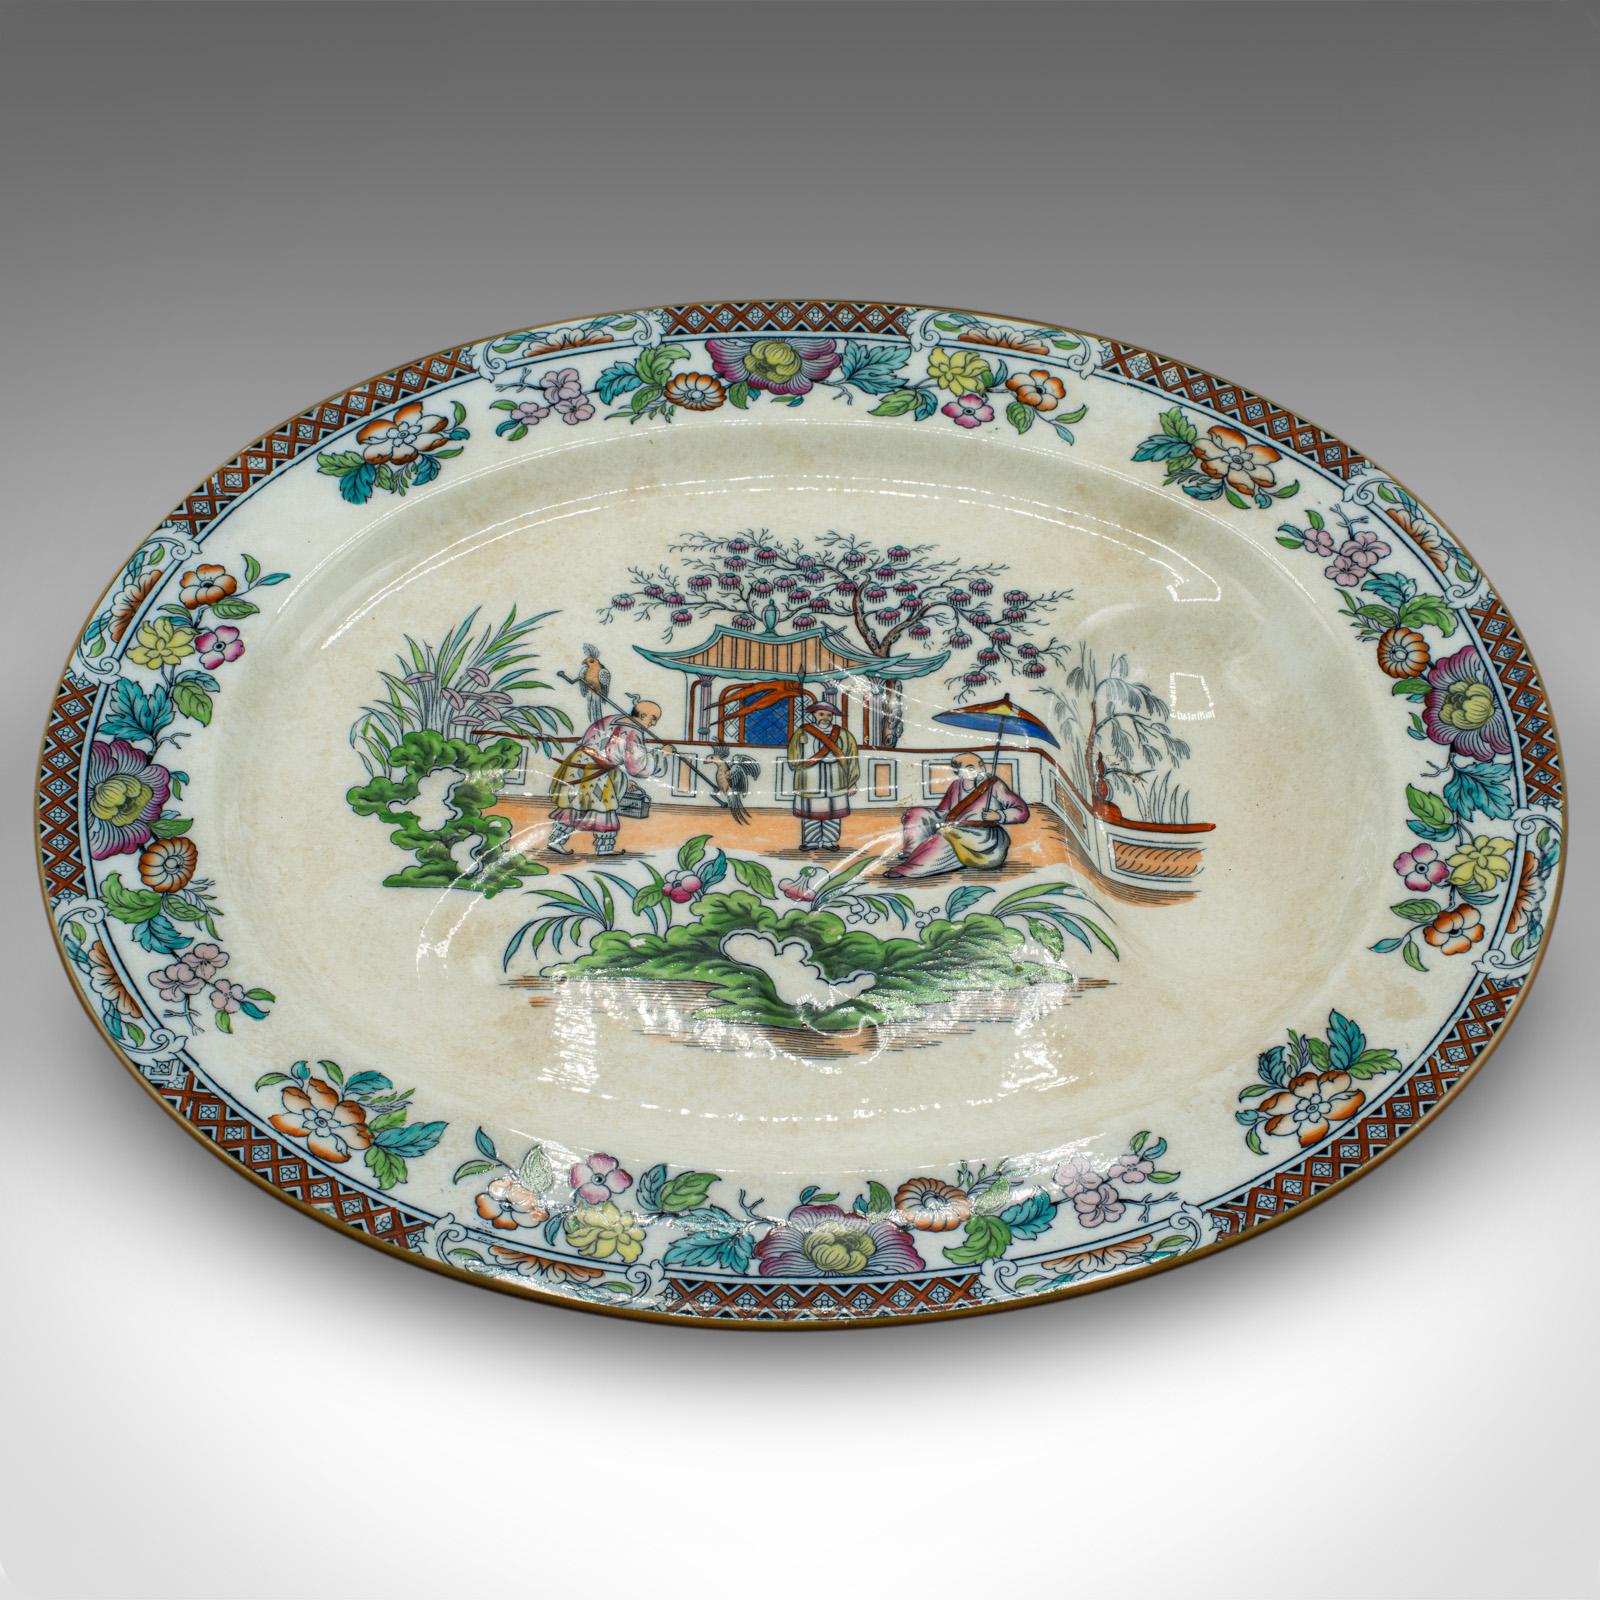 Large Antique Oval Meat Platter, Chinese, Ceramic, Serving Plate, Victorian In Good Condition For Sale In Hele, Devon, GB